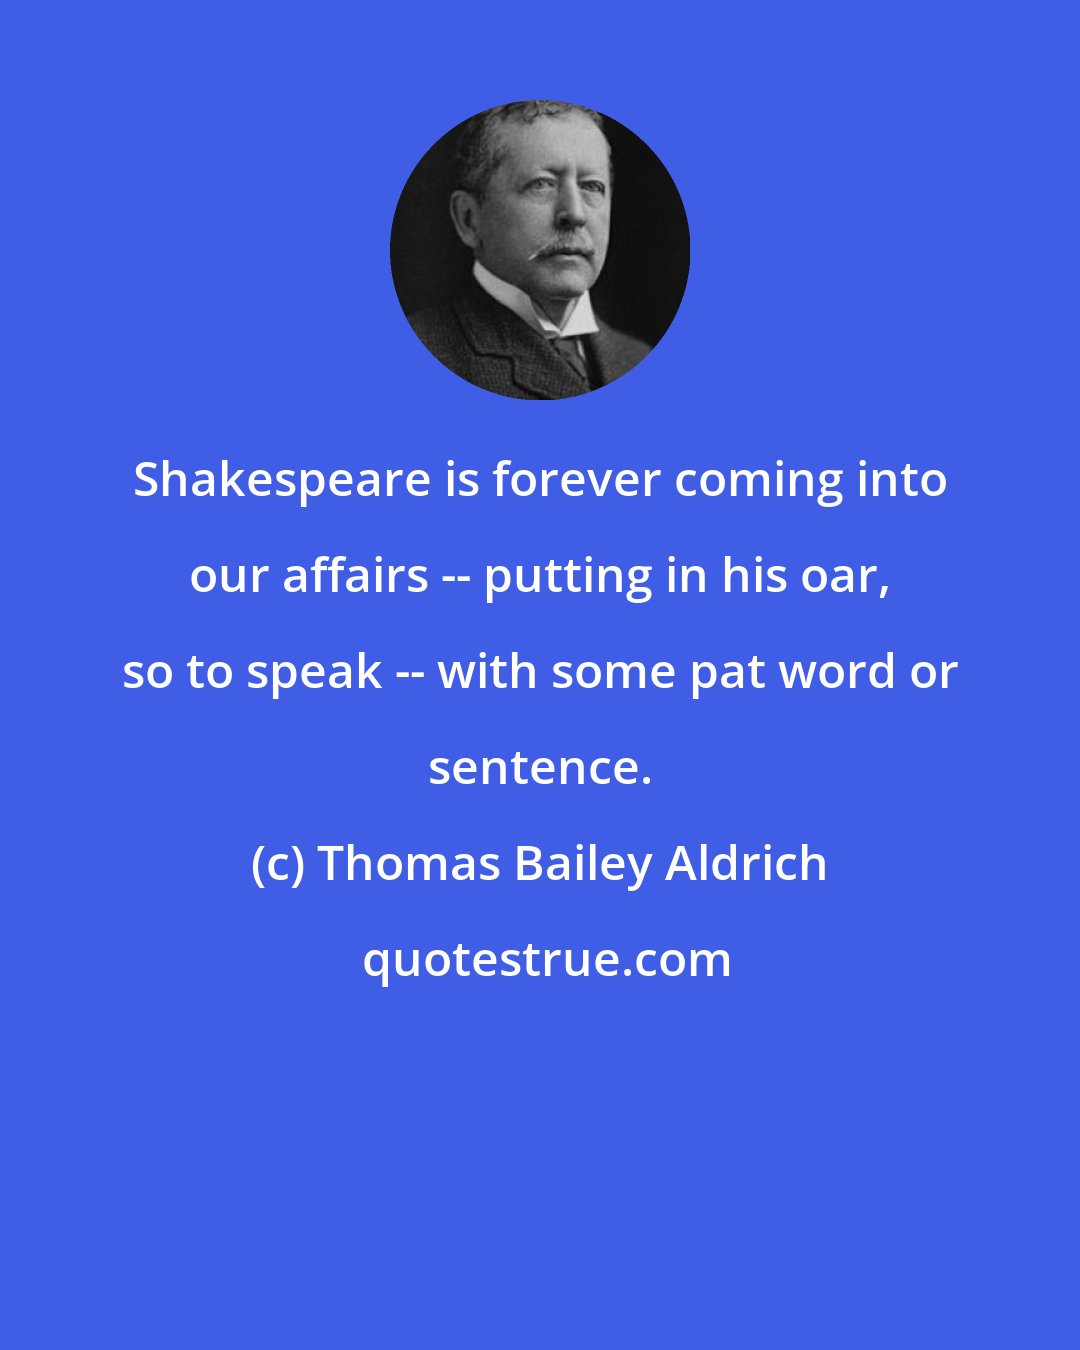 Thomas Bailey Aldrich: Shakespeare is forever coming into our affairs -- putting in his oar, so to speak -- with some pat word or sentence.